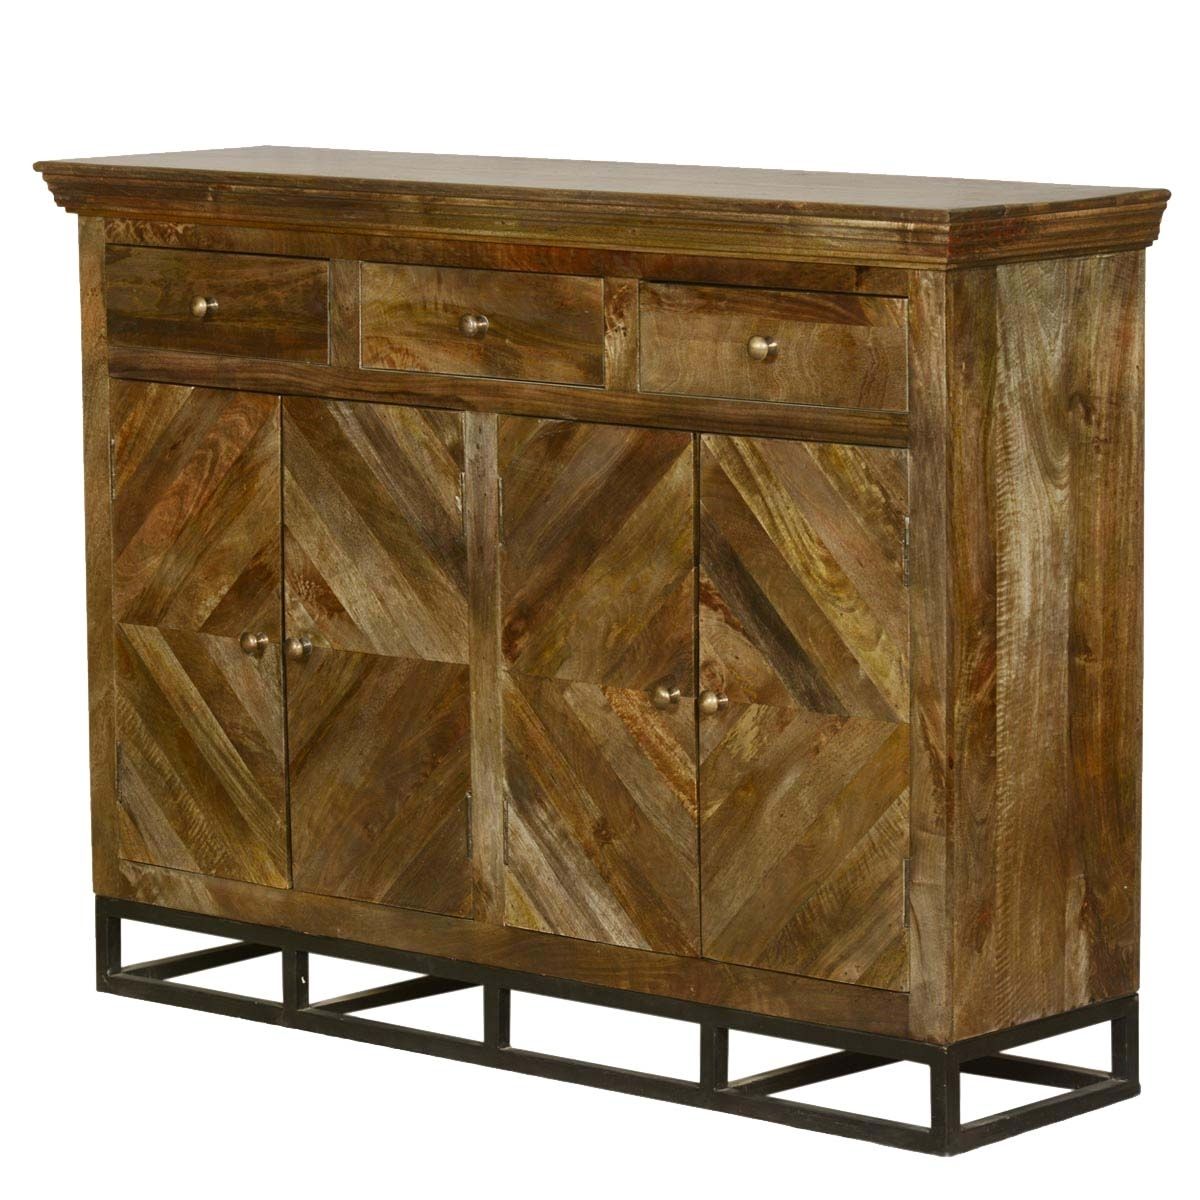 Parquet Diamond Mango Wood 3 Drawer Sideboard Pertaining To Best And Newest Parquet Sideboards (View 13 of 20)